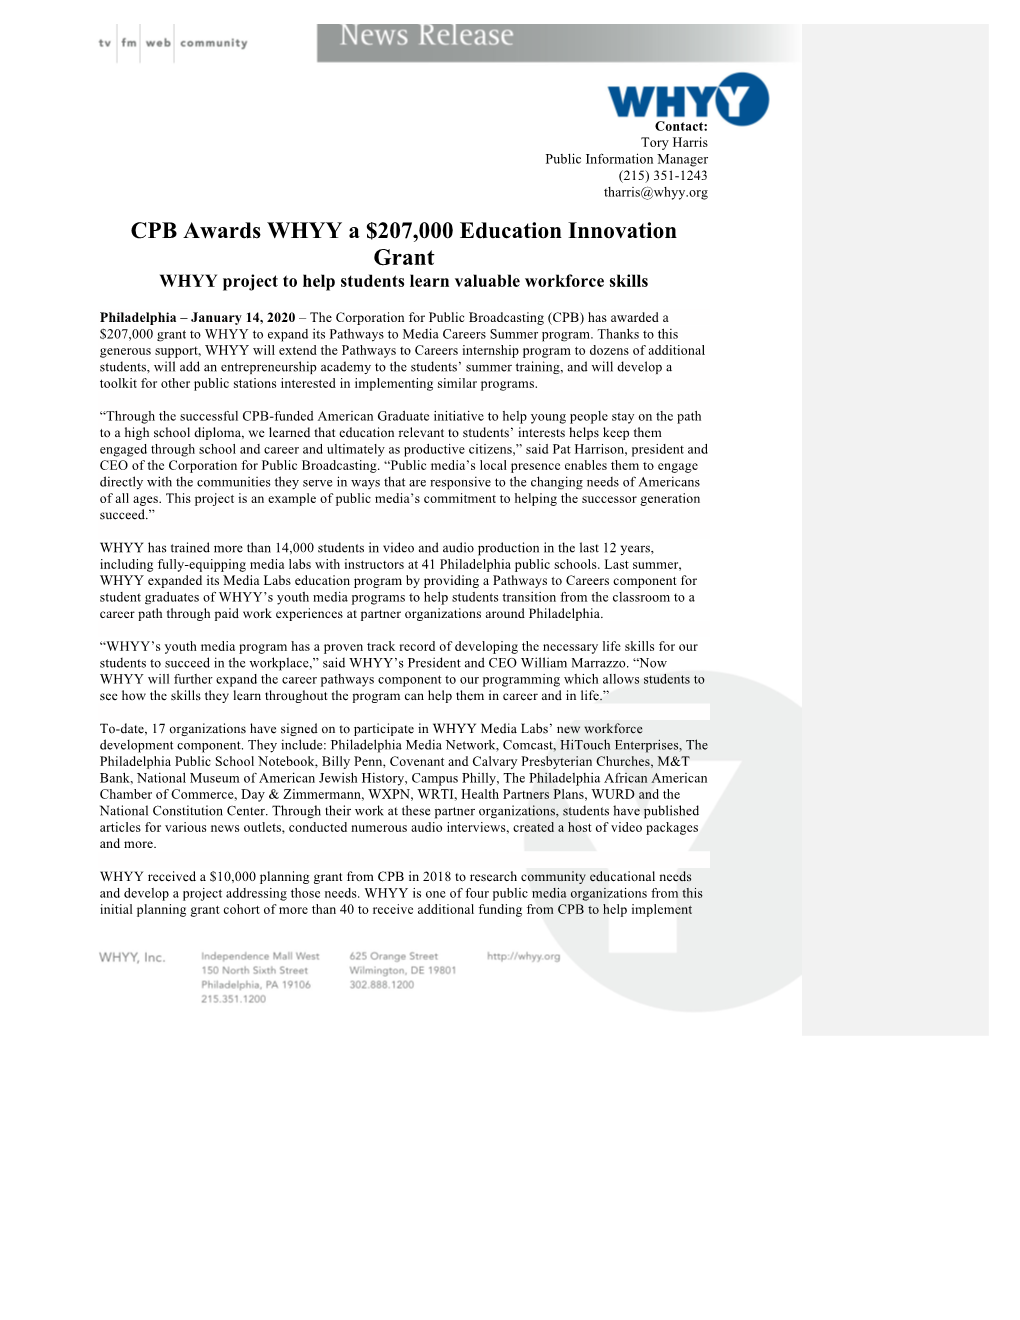 CPB Awards WHYY a $207,000 Education Innovation Grant WHYY Project to Help Students Learn Valuable Workforce Skills